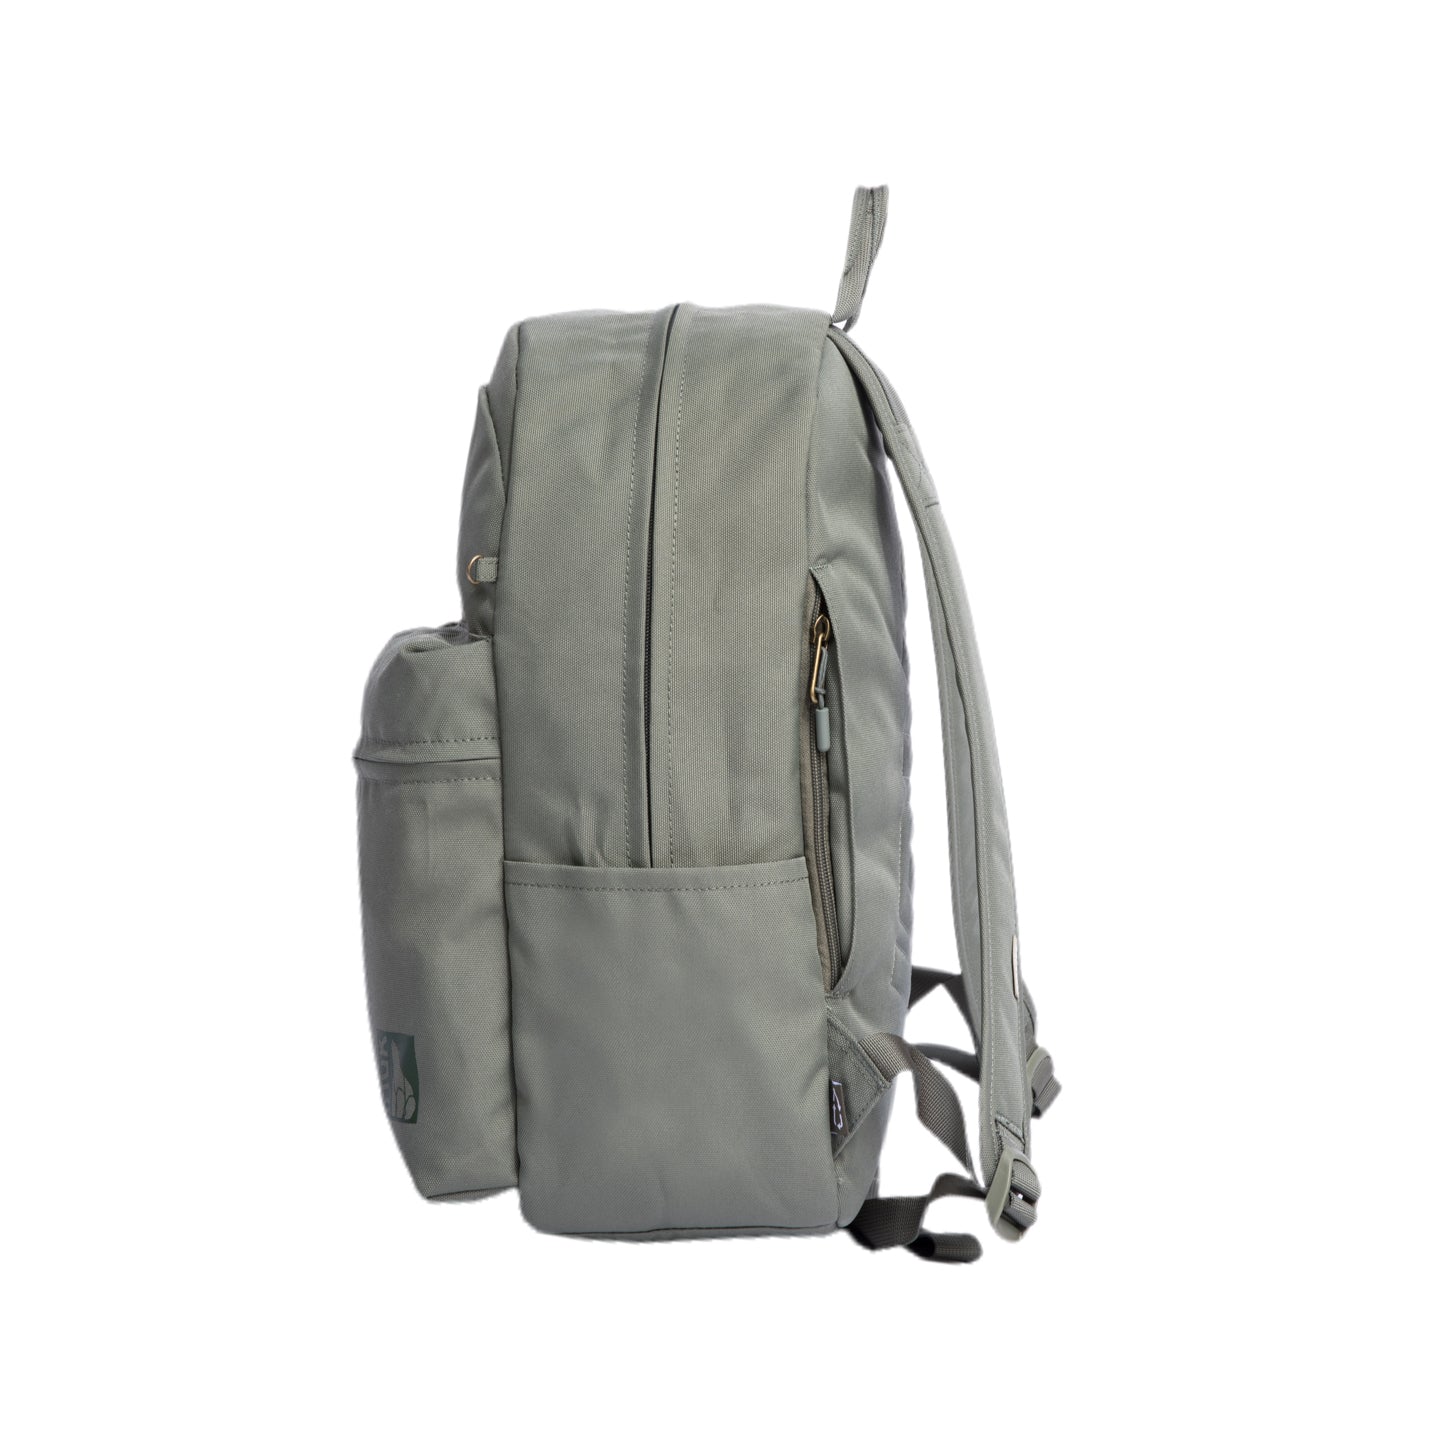 Sparwood_RP Backpack - Recycled fabrics (18L)